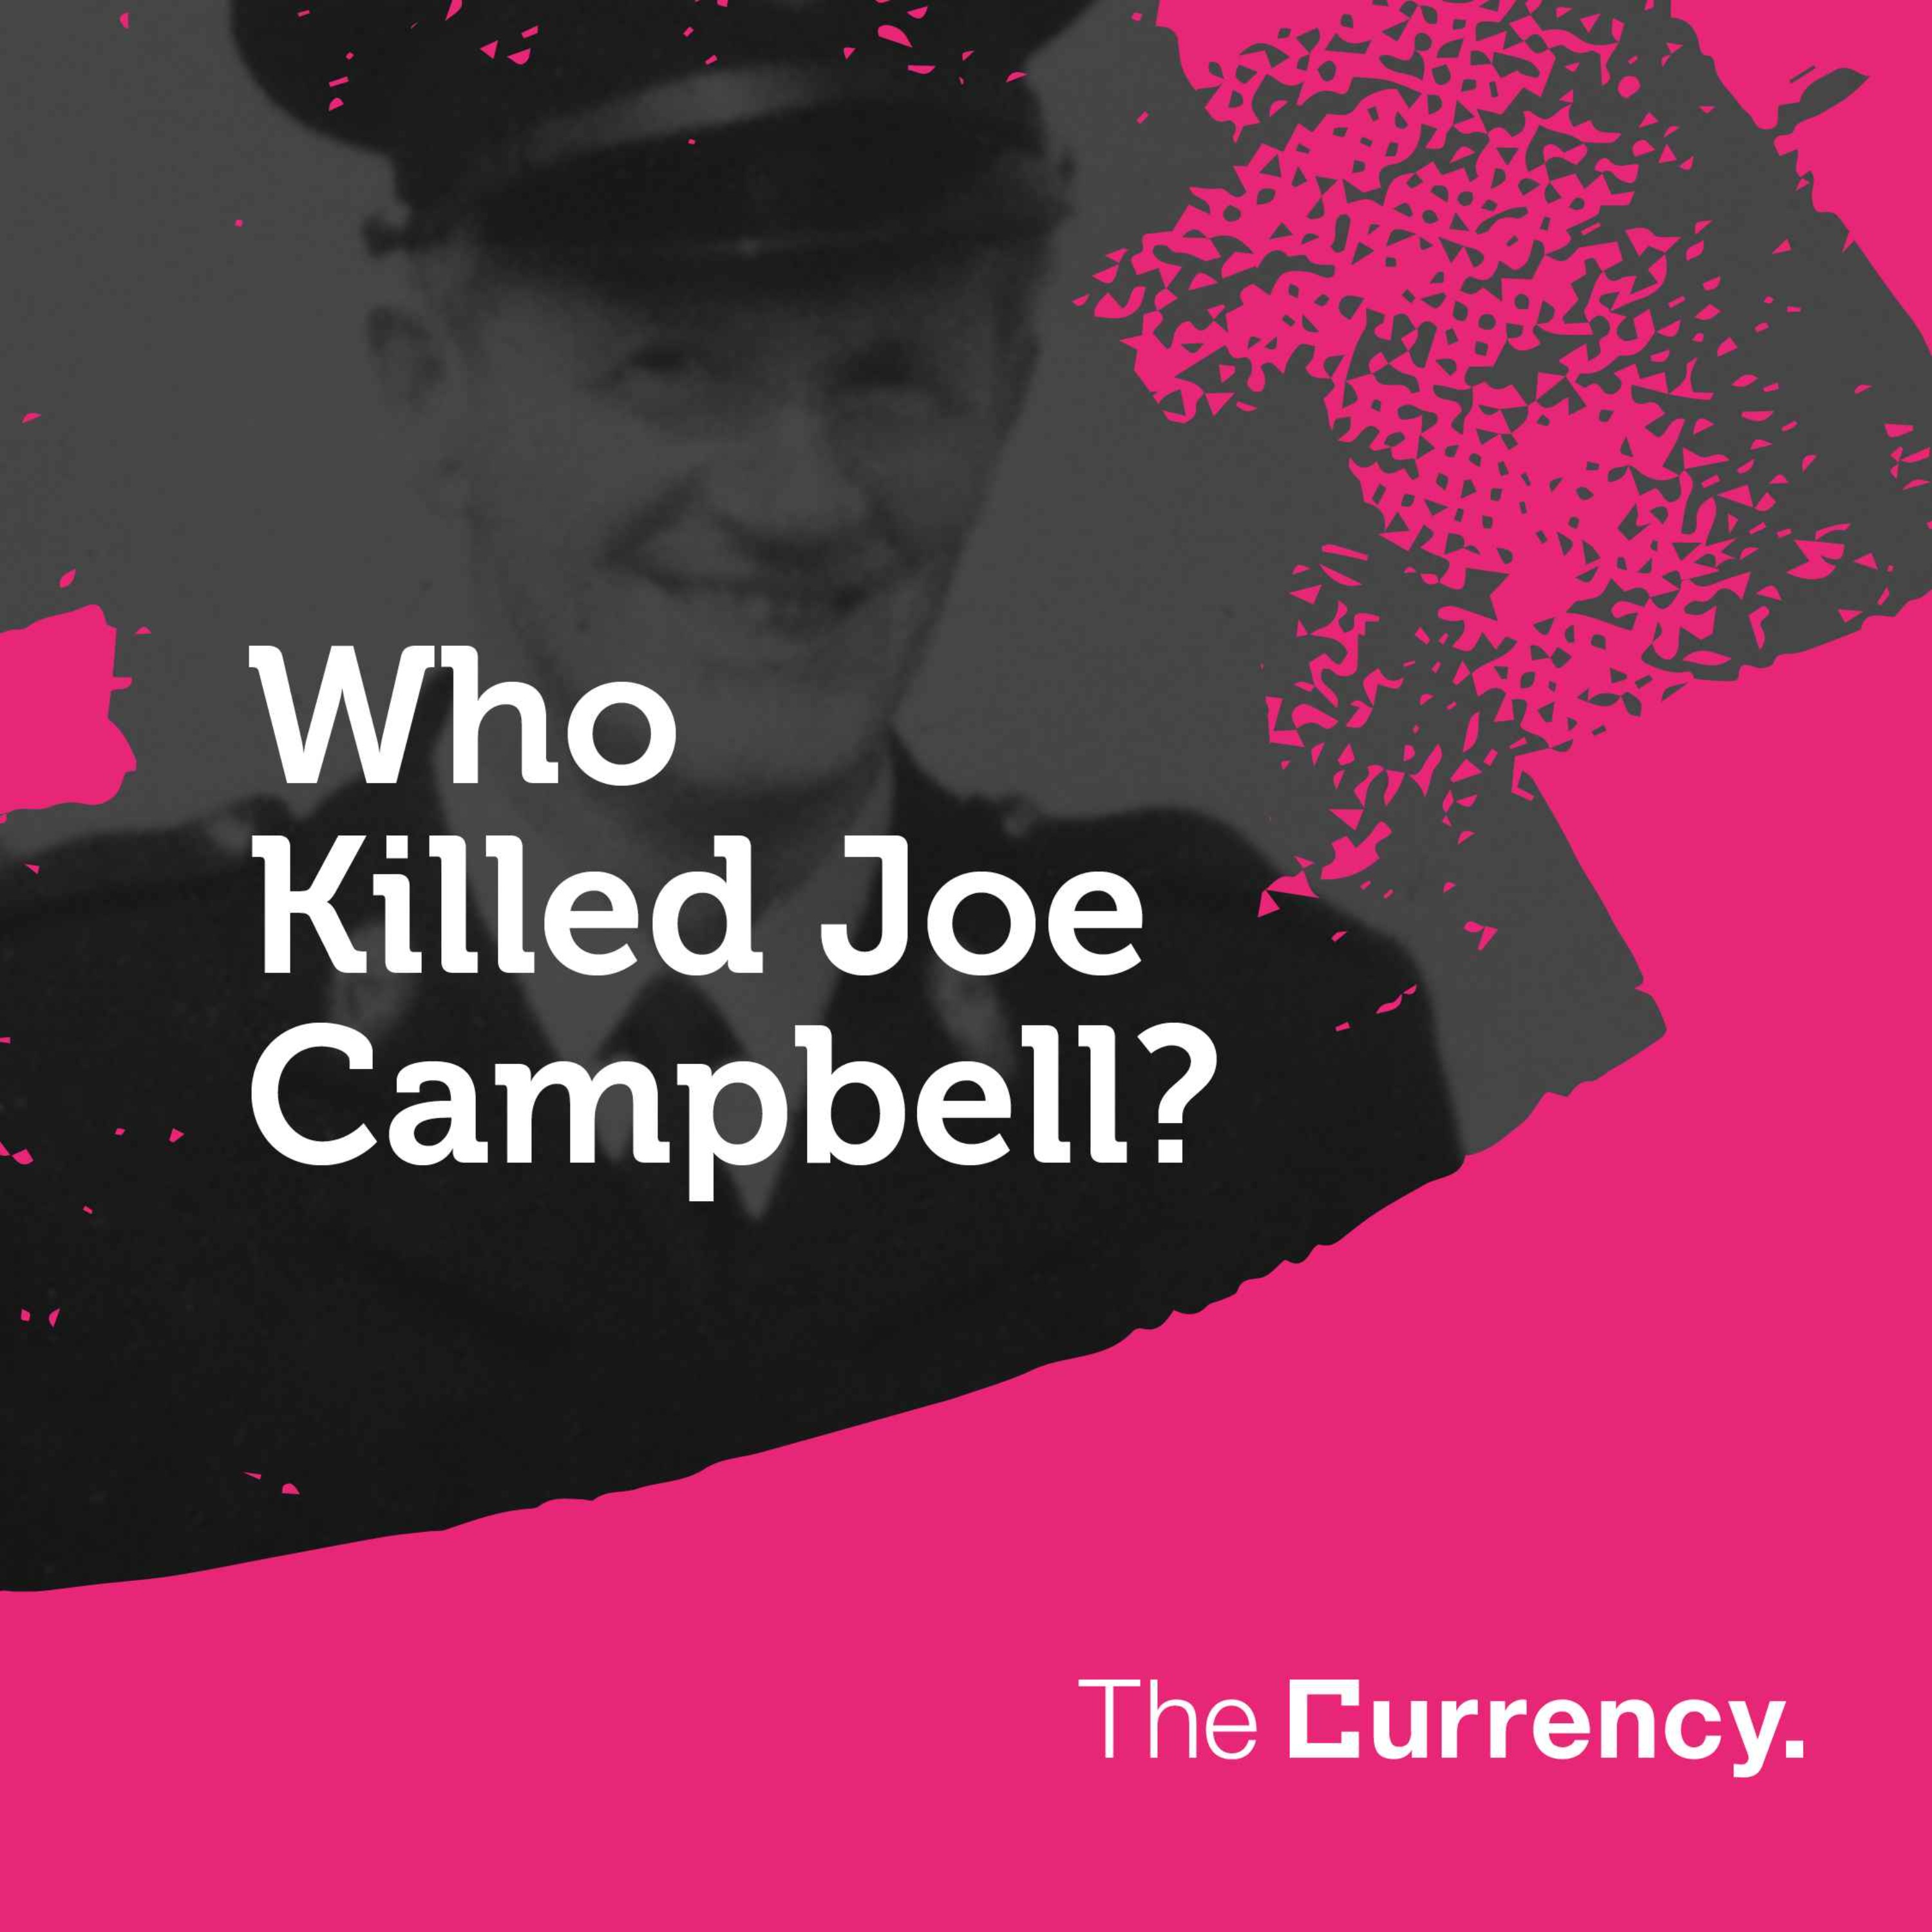 The Currency - Who Killed Joe Campbell?